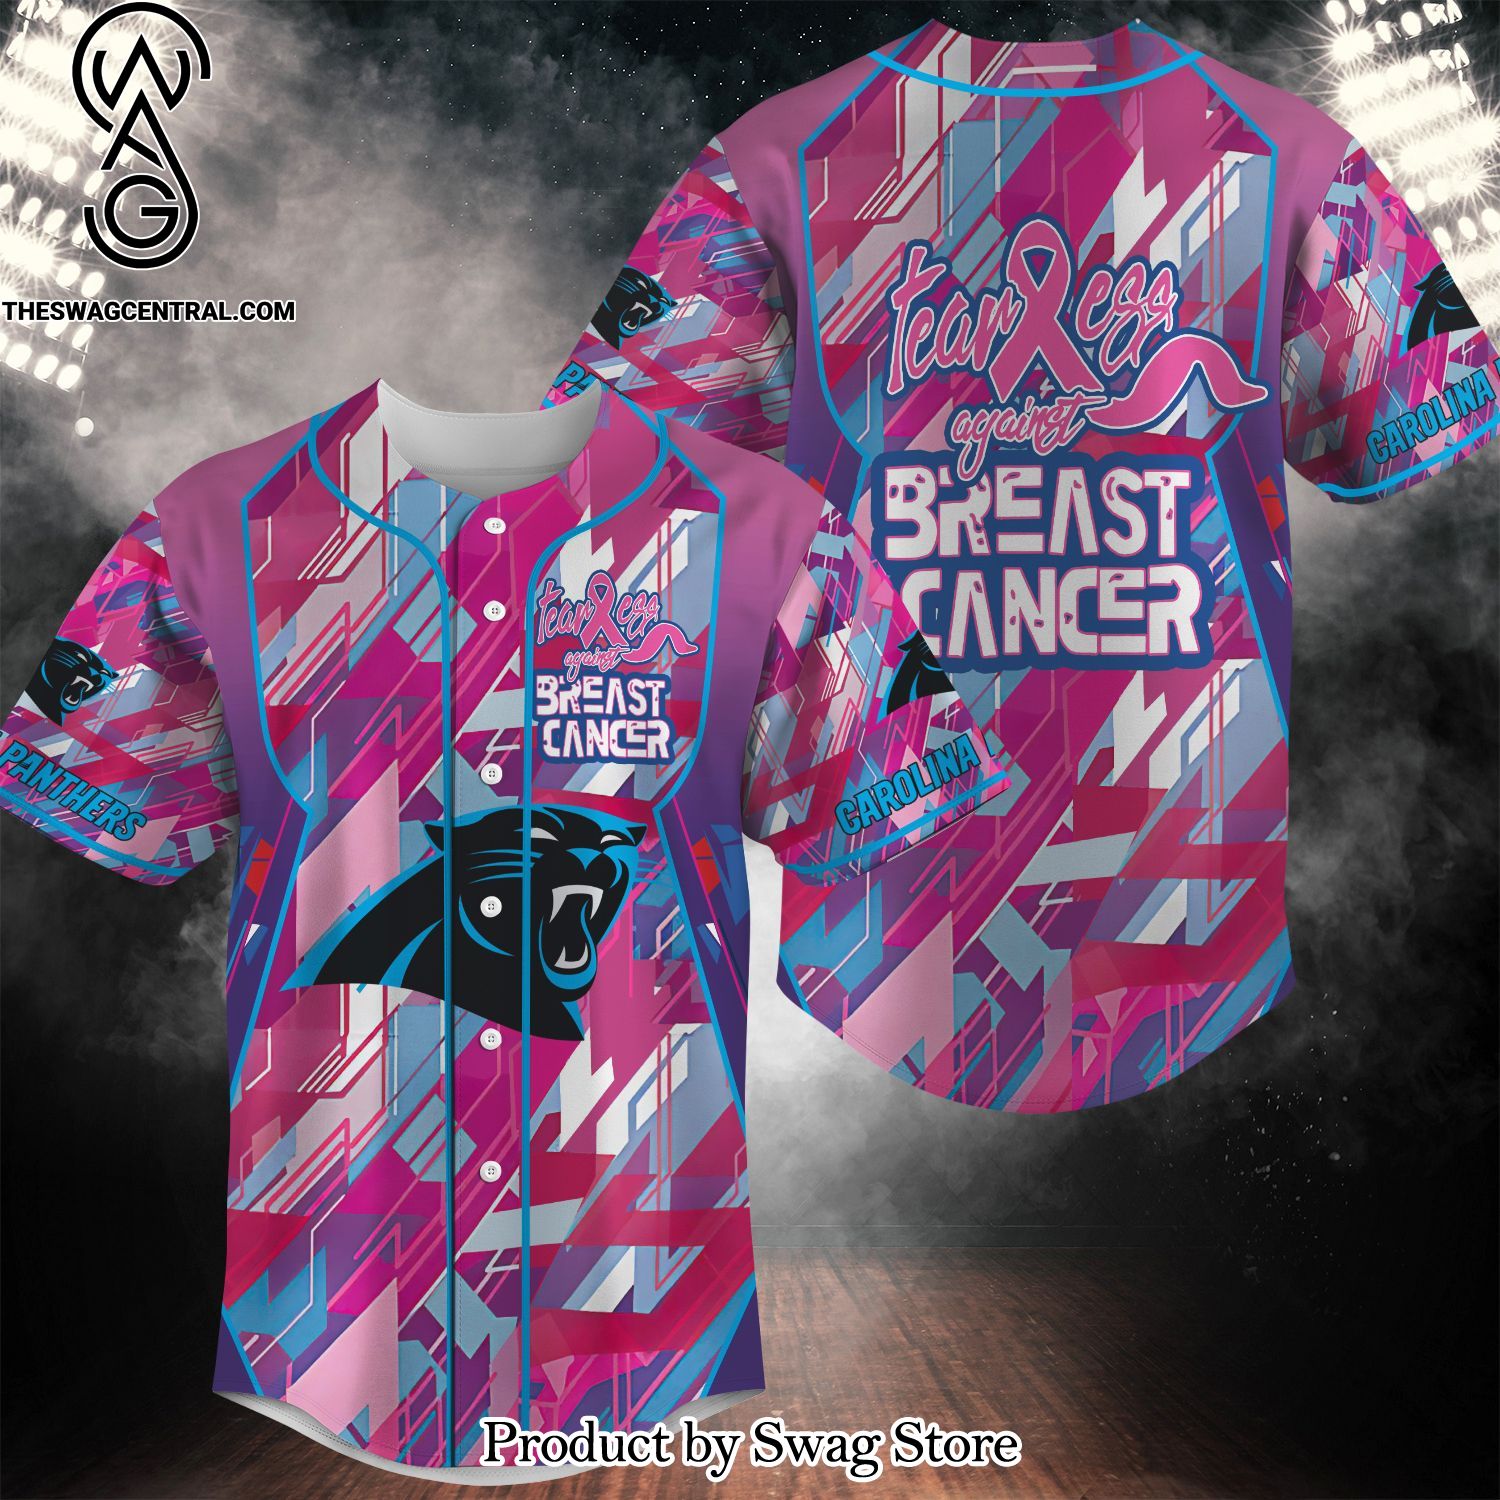 National Football League Carolina Panthers Pink Can Fearless Again Breast Cancer Full Printing Unisex Baseball Jersey